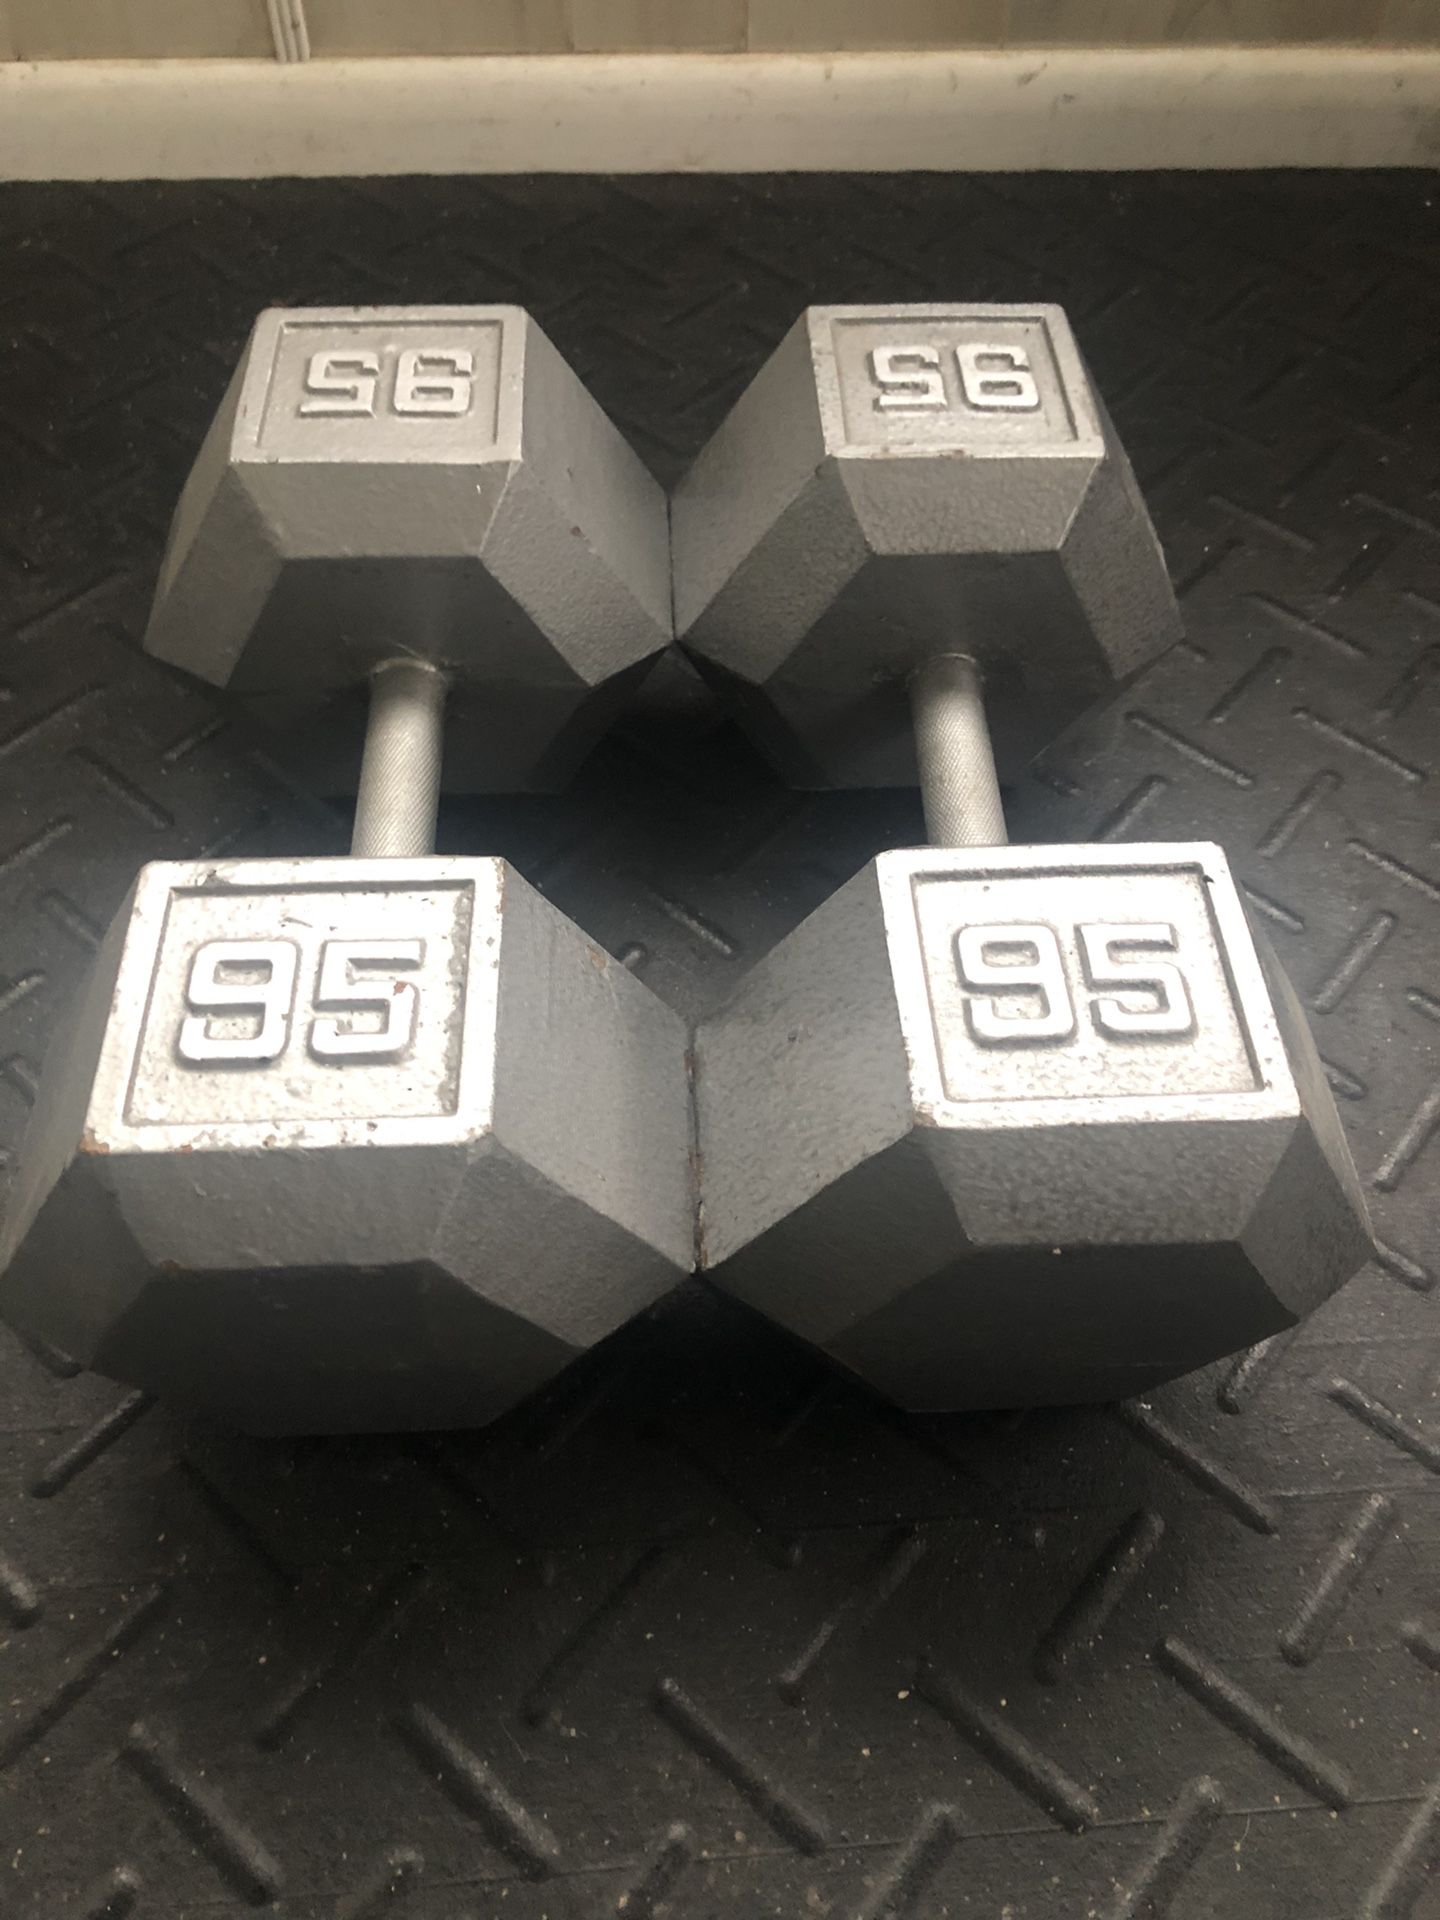 Pair of 95 pound dumbbells